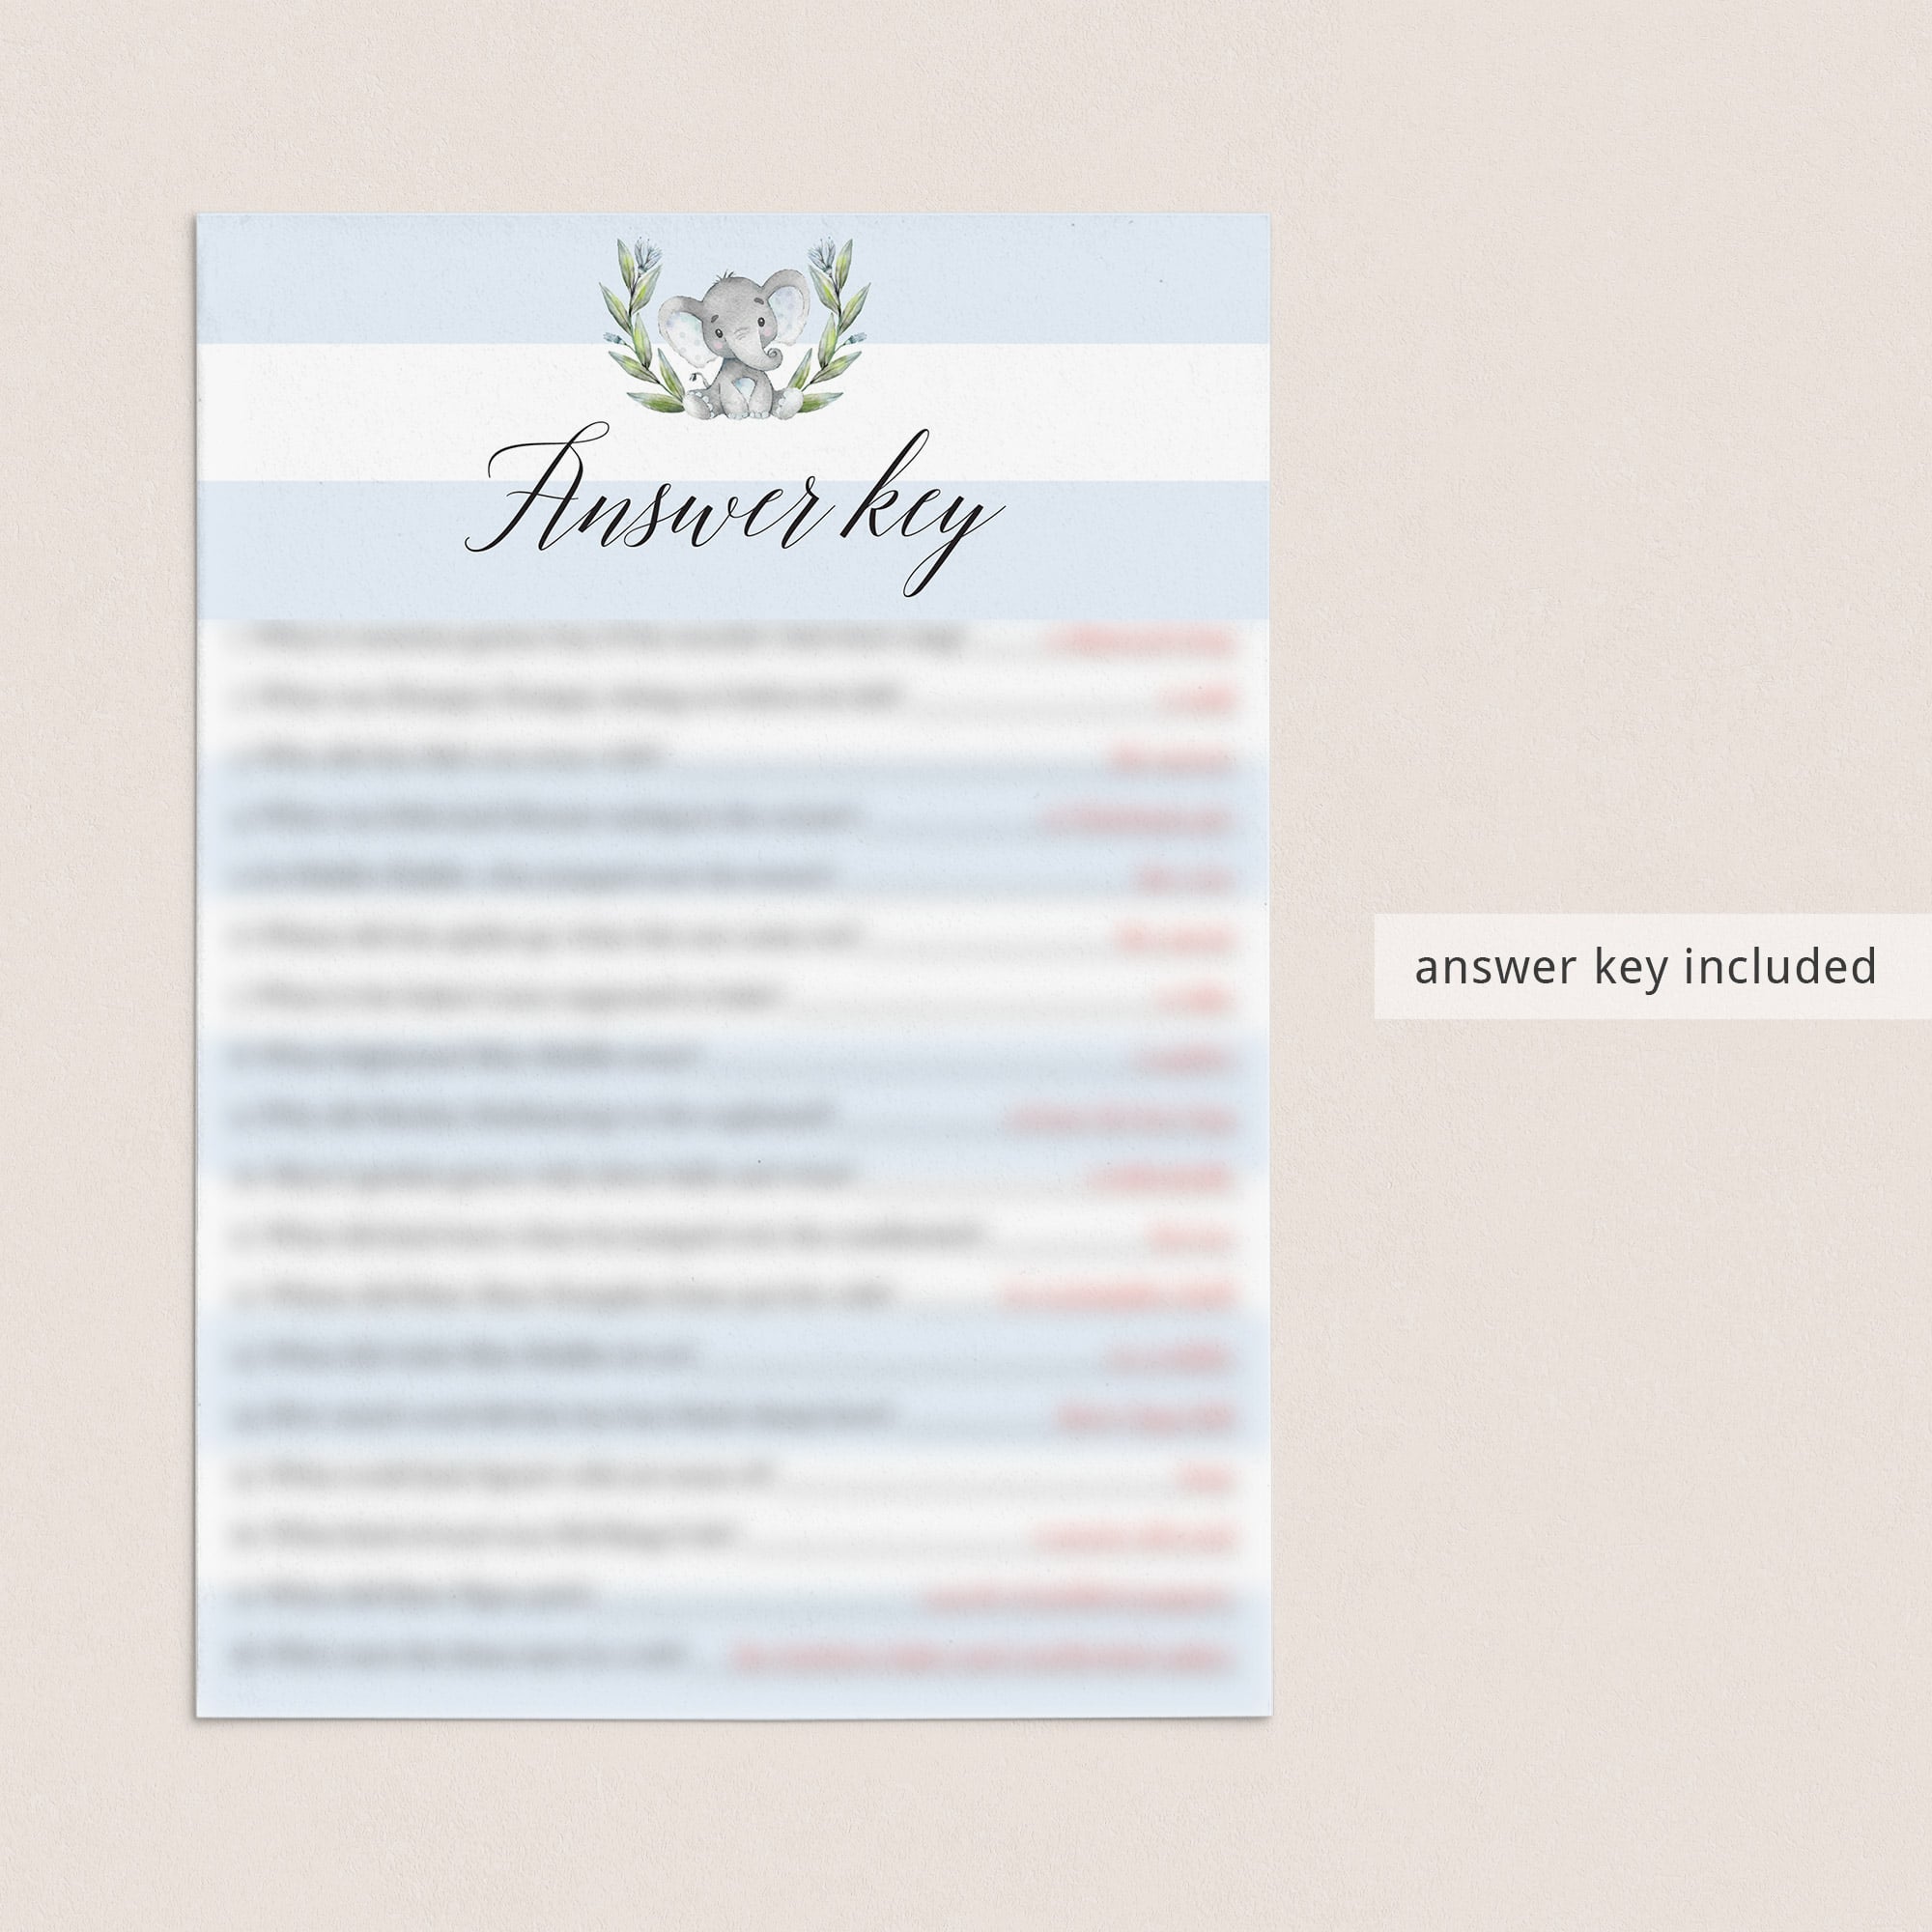 Baby nursery rhyme questions and nursery rhyme answers printable for baby showers by LittleSizzle